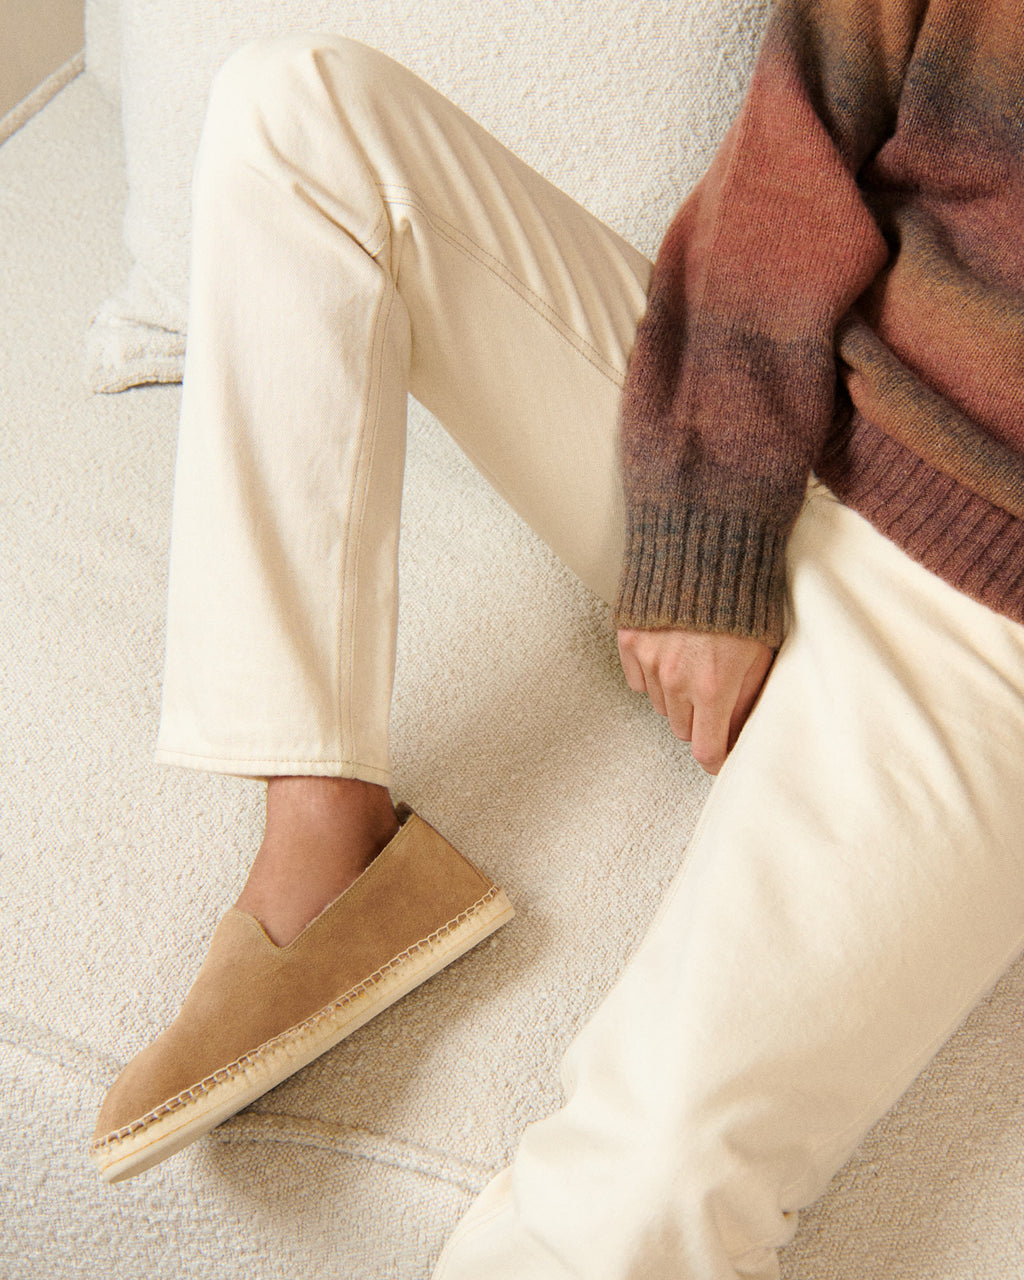 Suede With Faux Fur Flat Espadrilles With Fur - Cortina Vintage Taupe